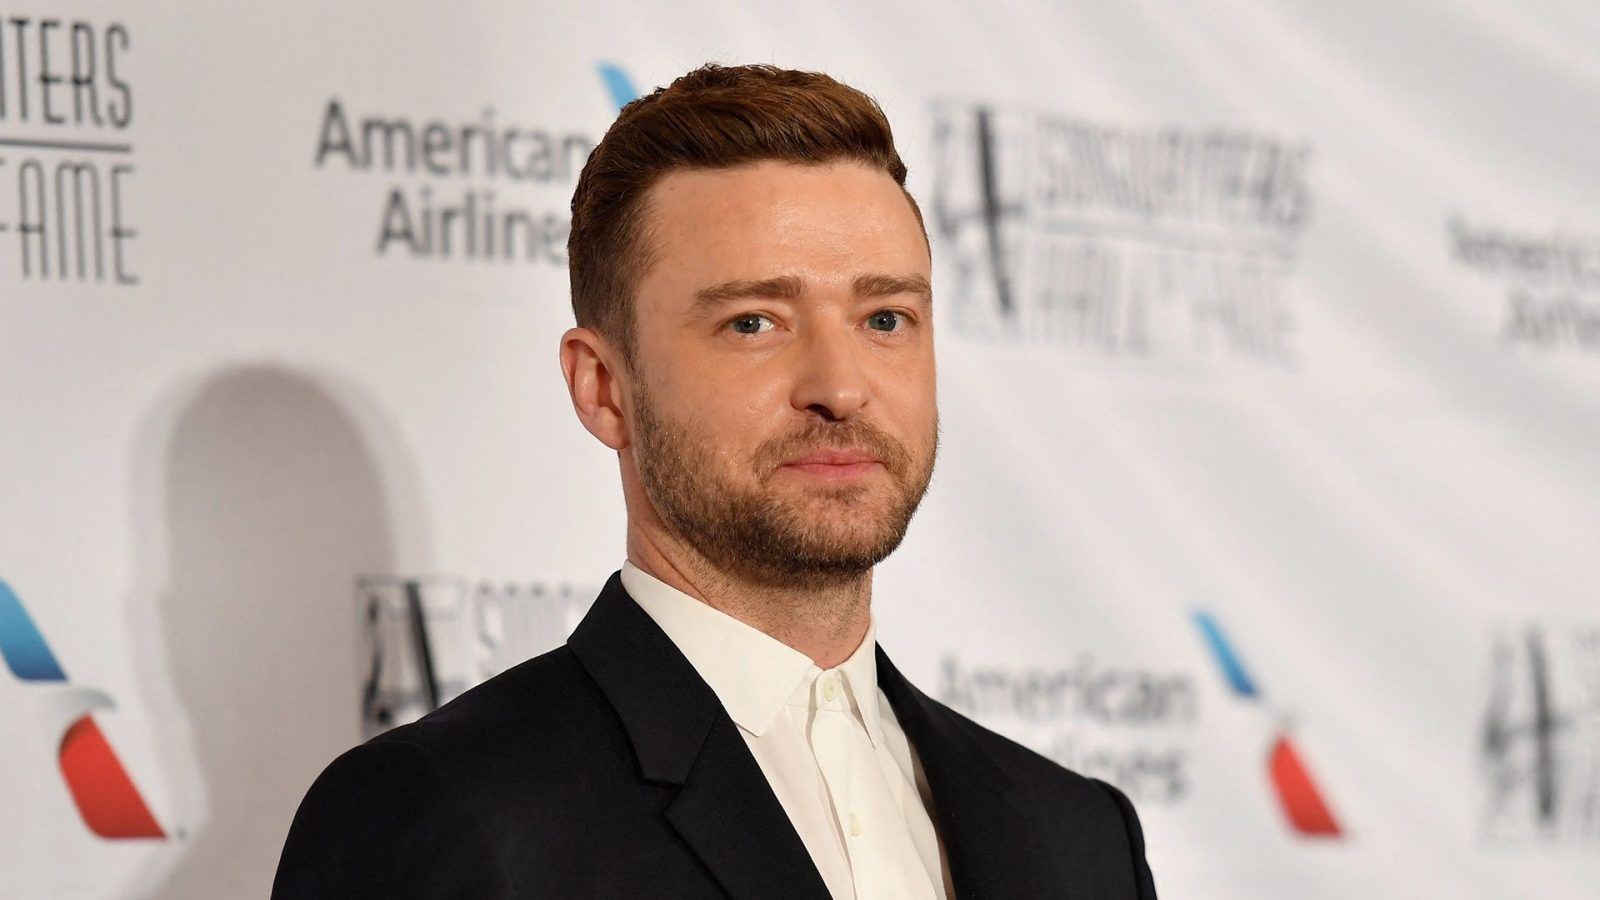 Justin Timberlake: Latest News, Pictures & Videos - HELLO!